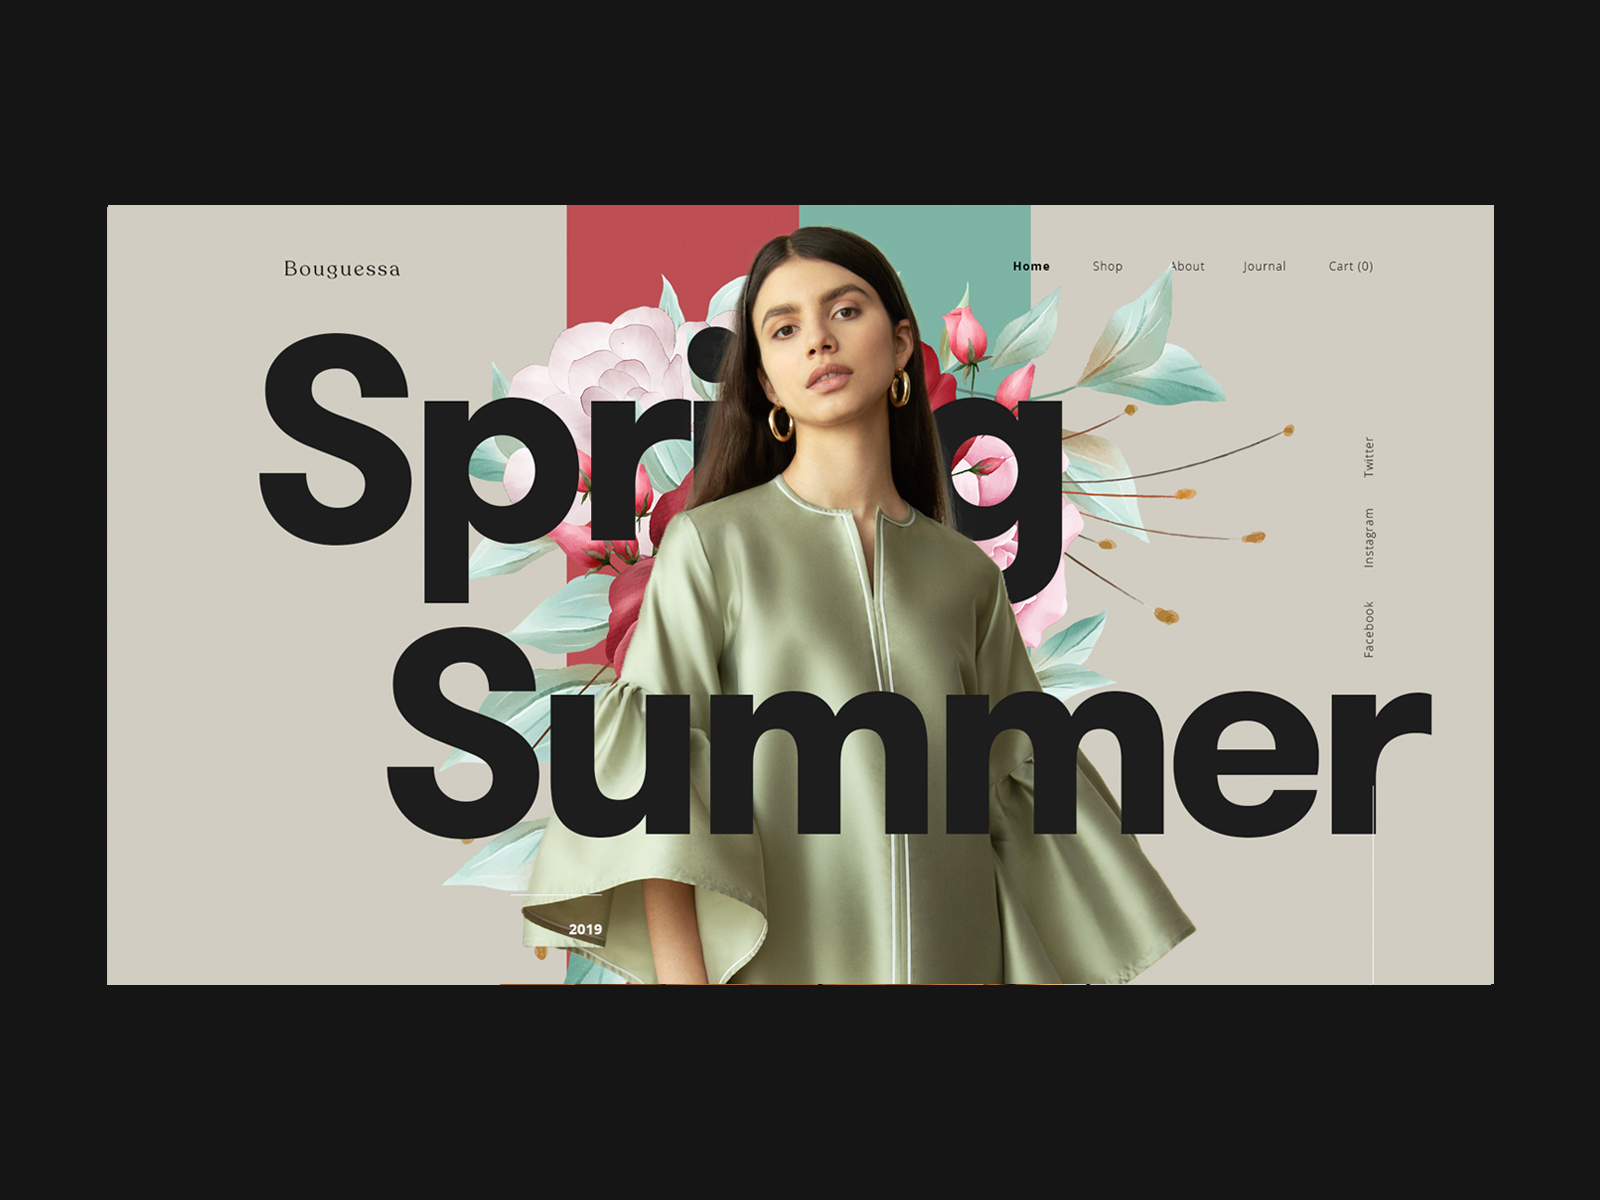 Spring & summer by Eslam Said on Dribbble